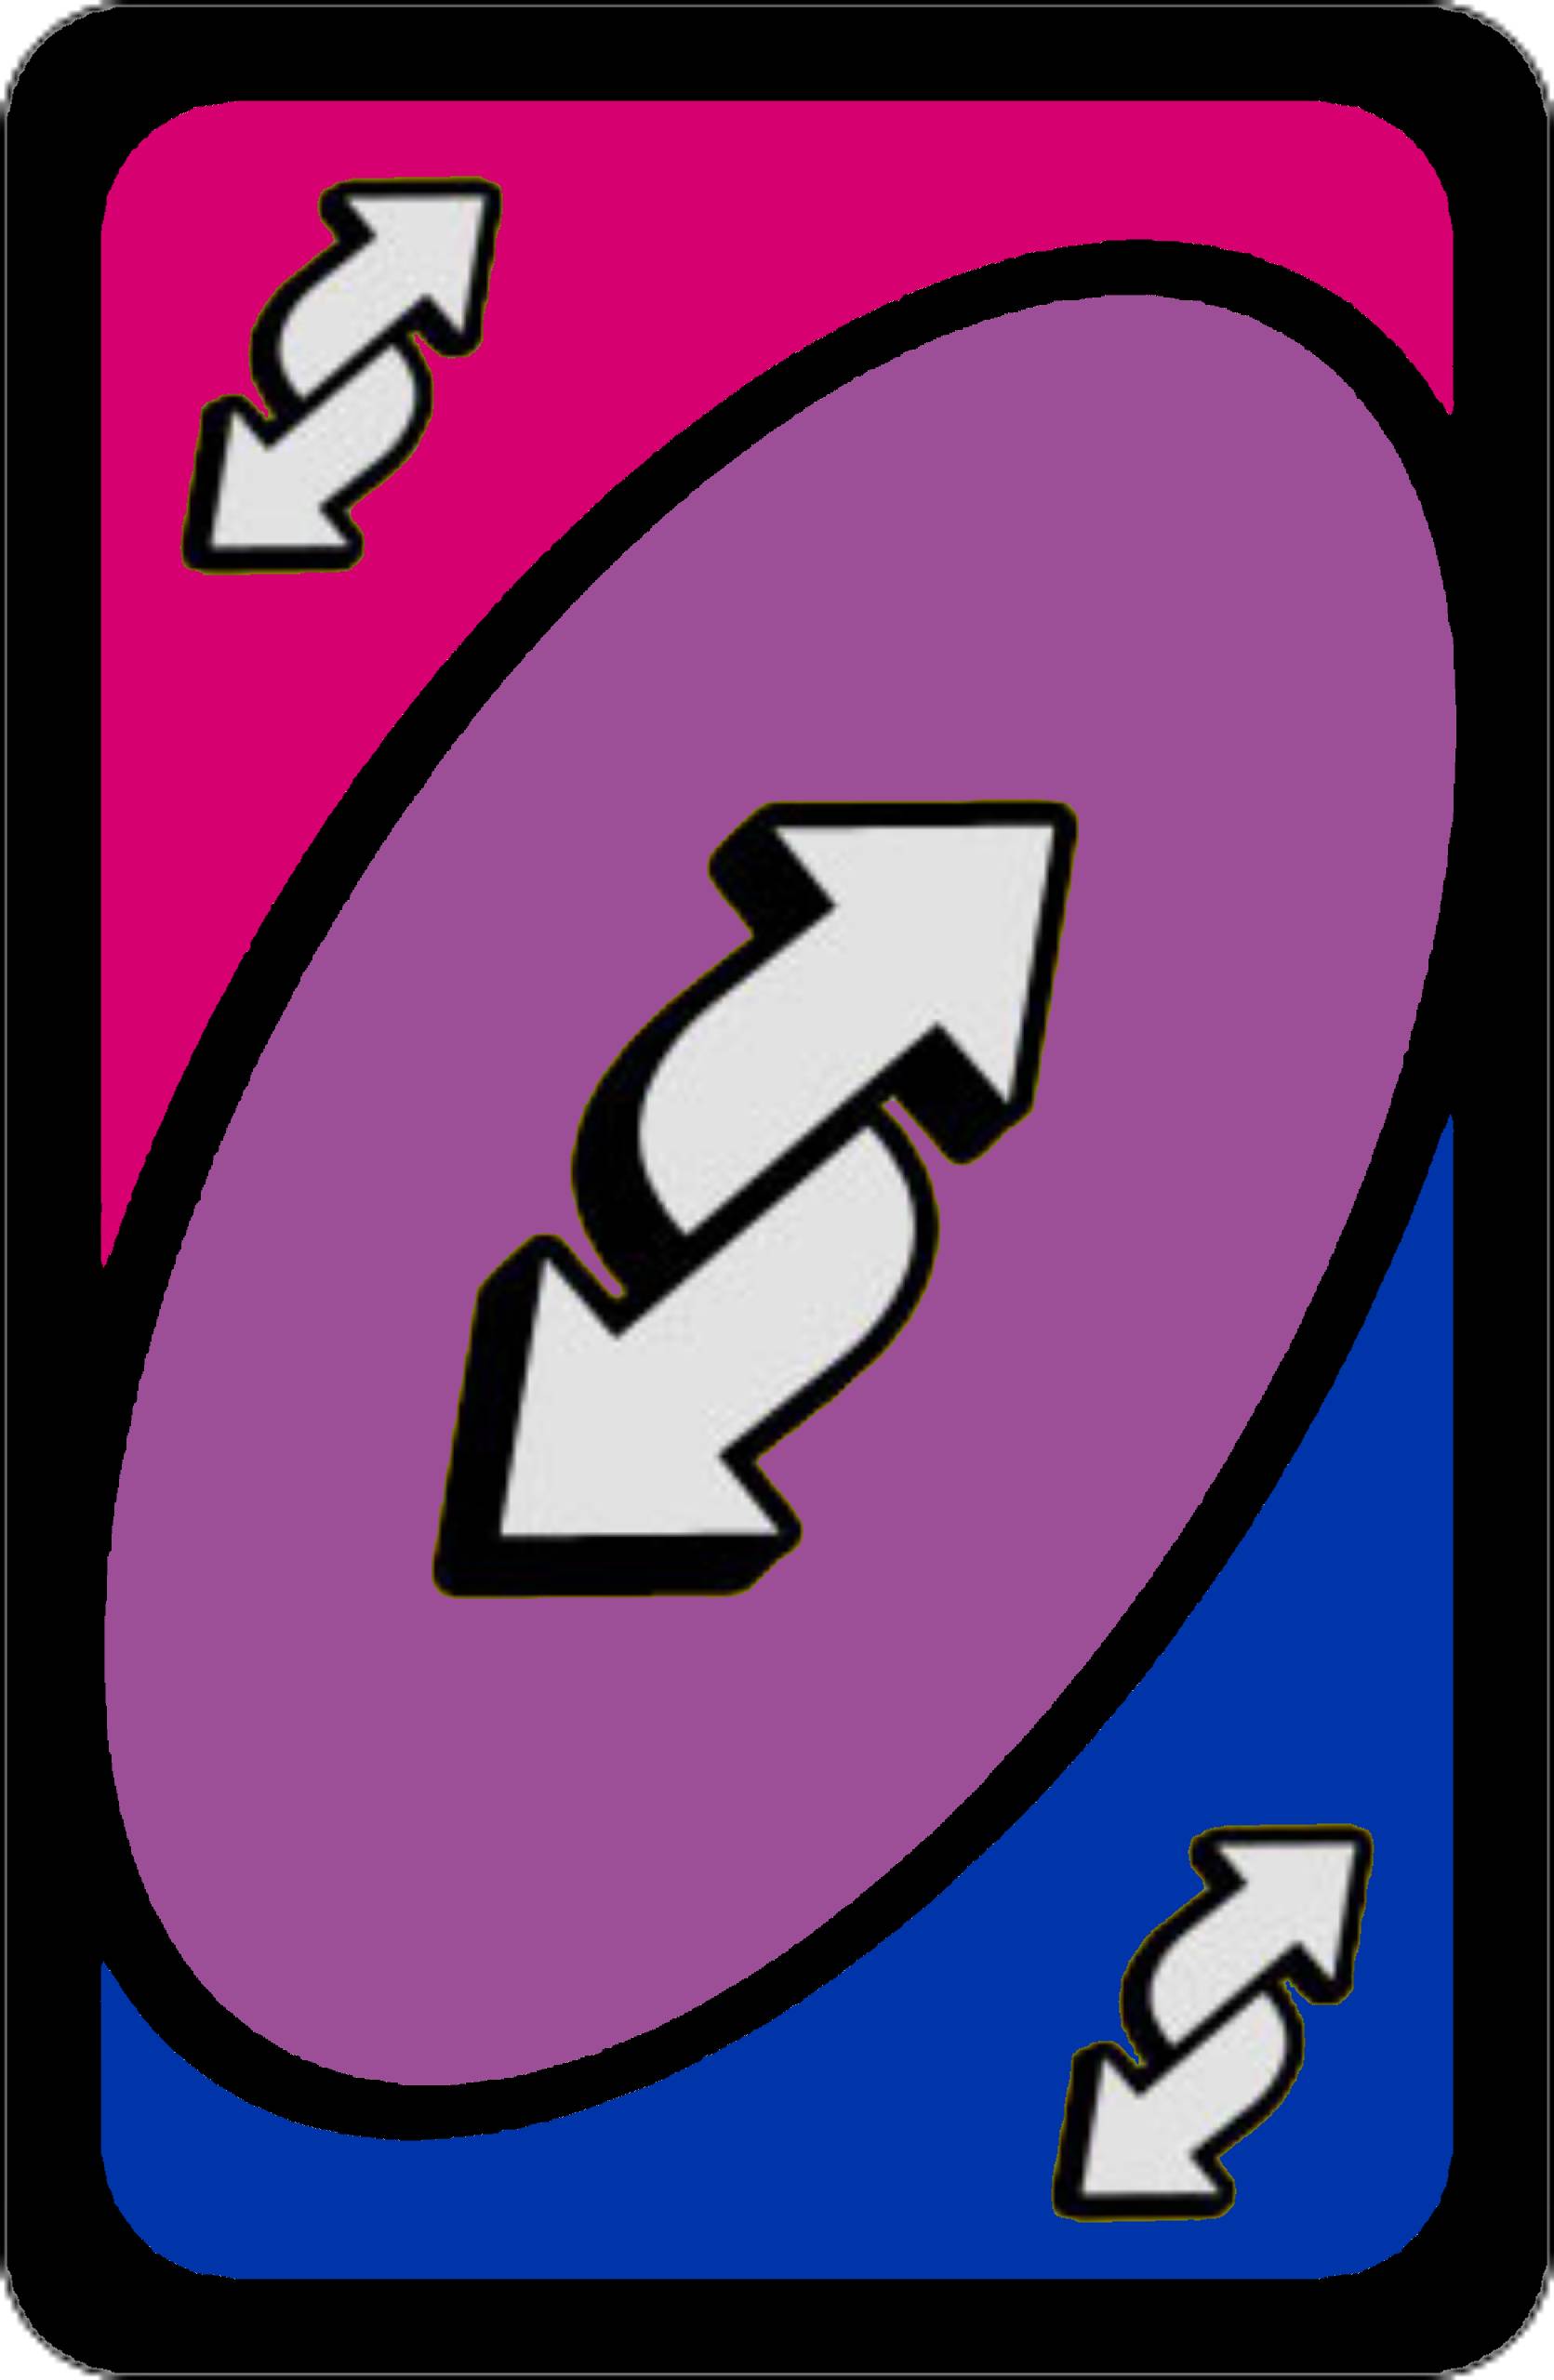 Blue & Red Uno Reverse Card Meme Wallpapers - Wallpapers Clan